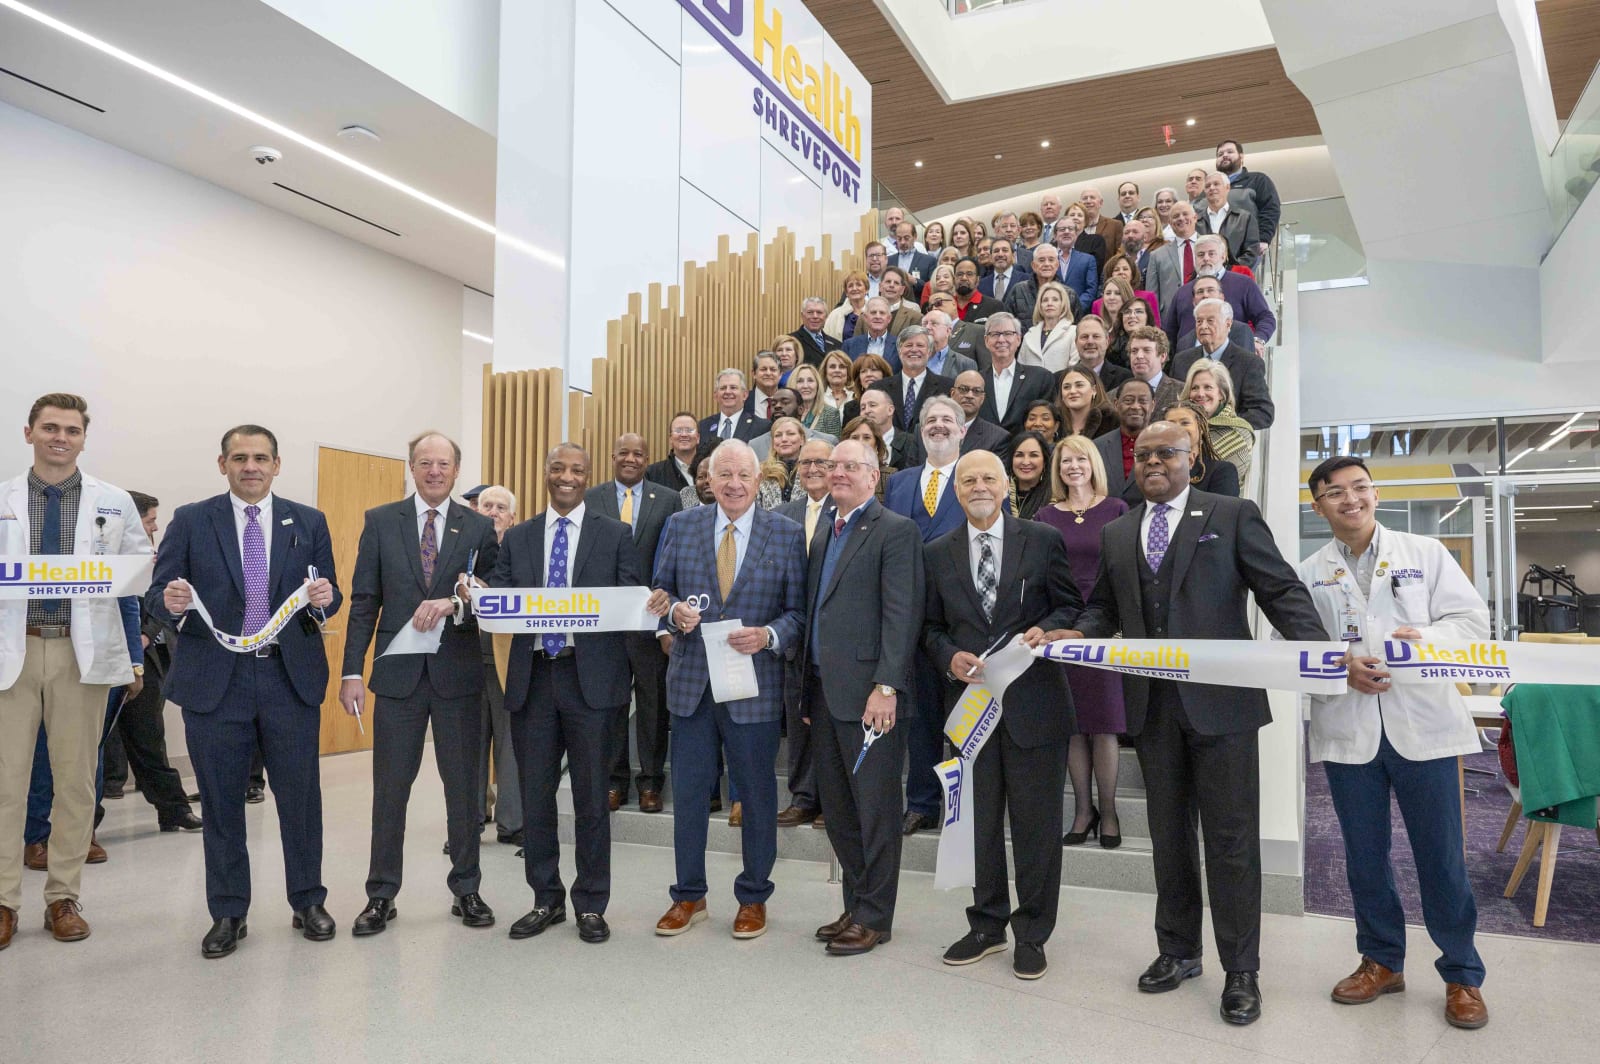 LSU President Tate, Gov. John Bel Edwards and others take part in a ribbon cutting inside the new medical education building.